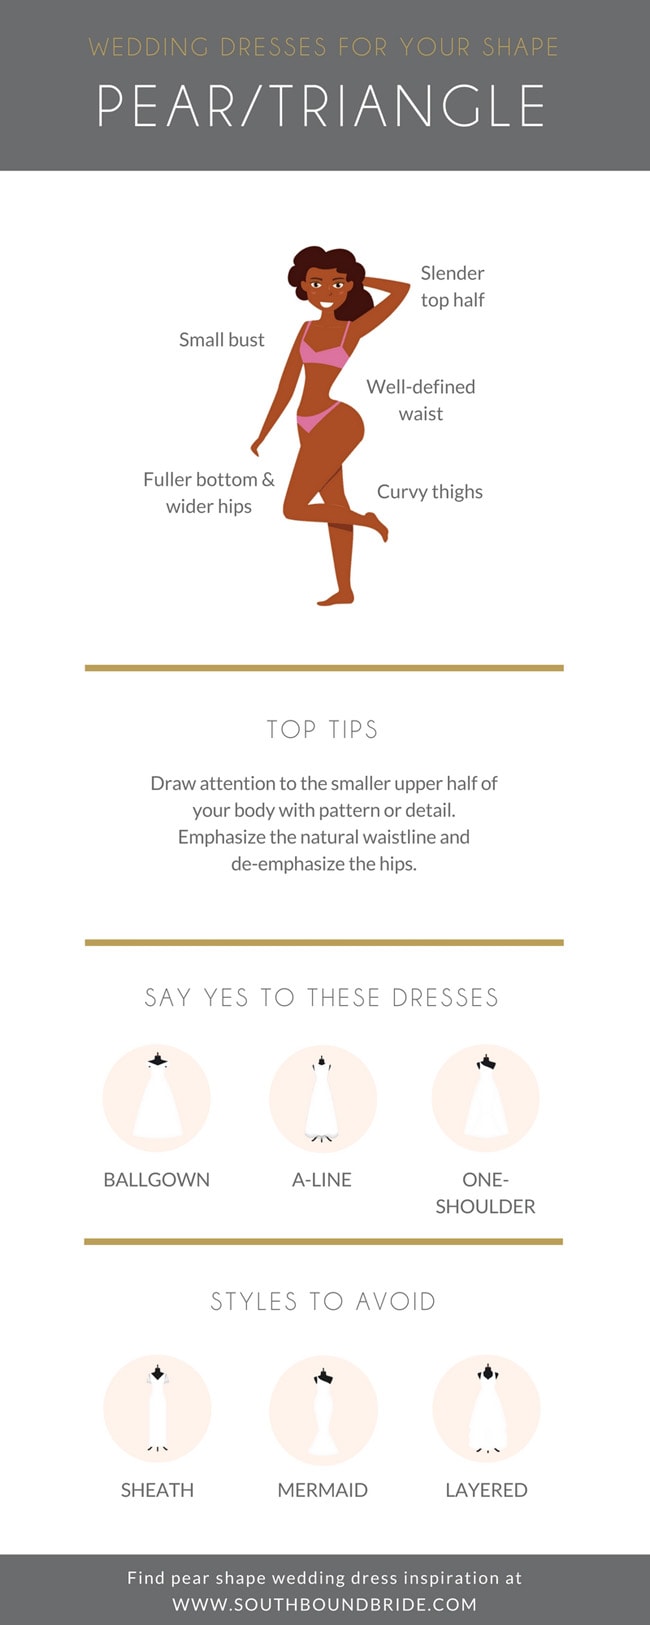 Wedding Dresses for Pear or Triangle Shape Brides Infographic | SouthBound Bride